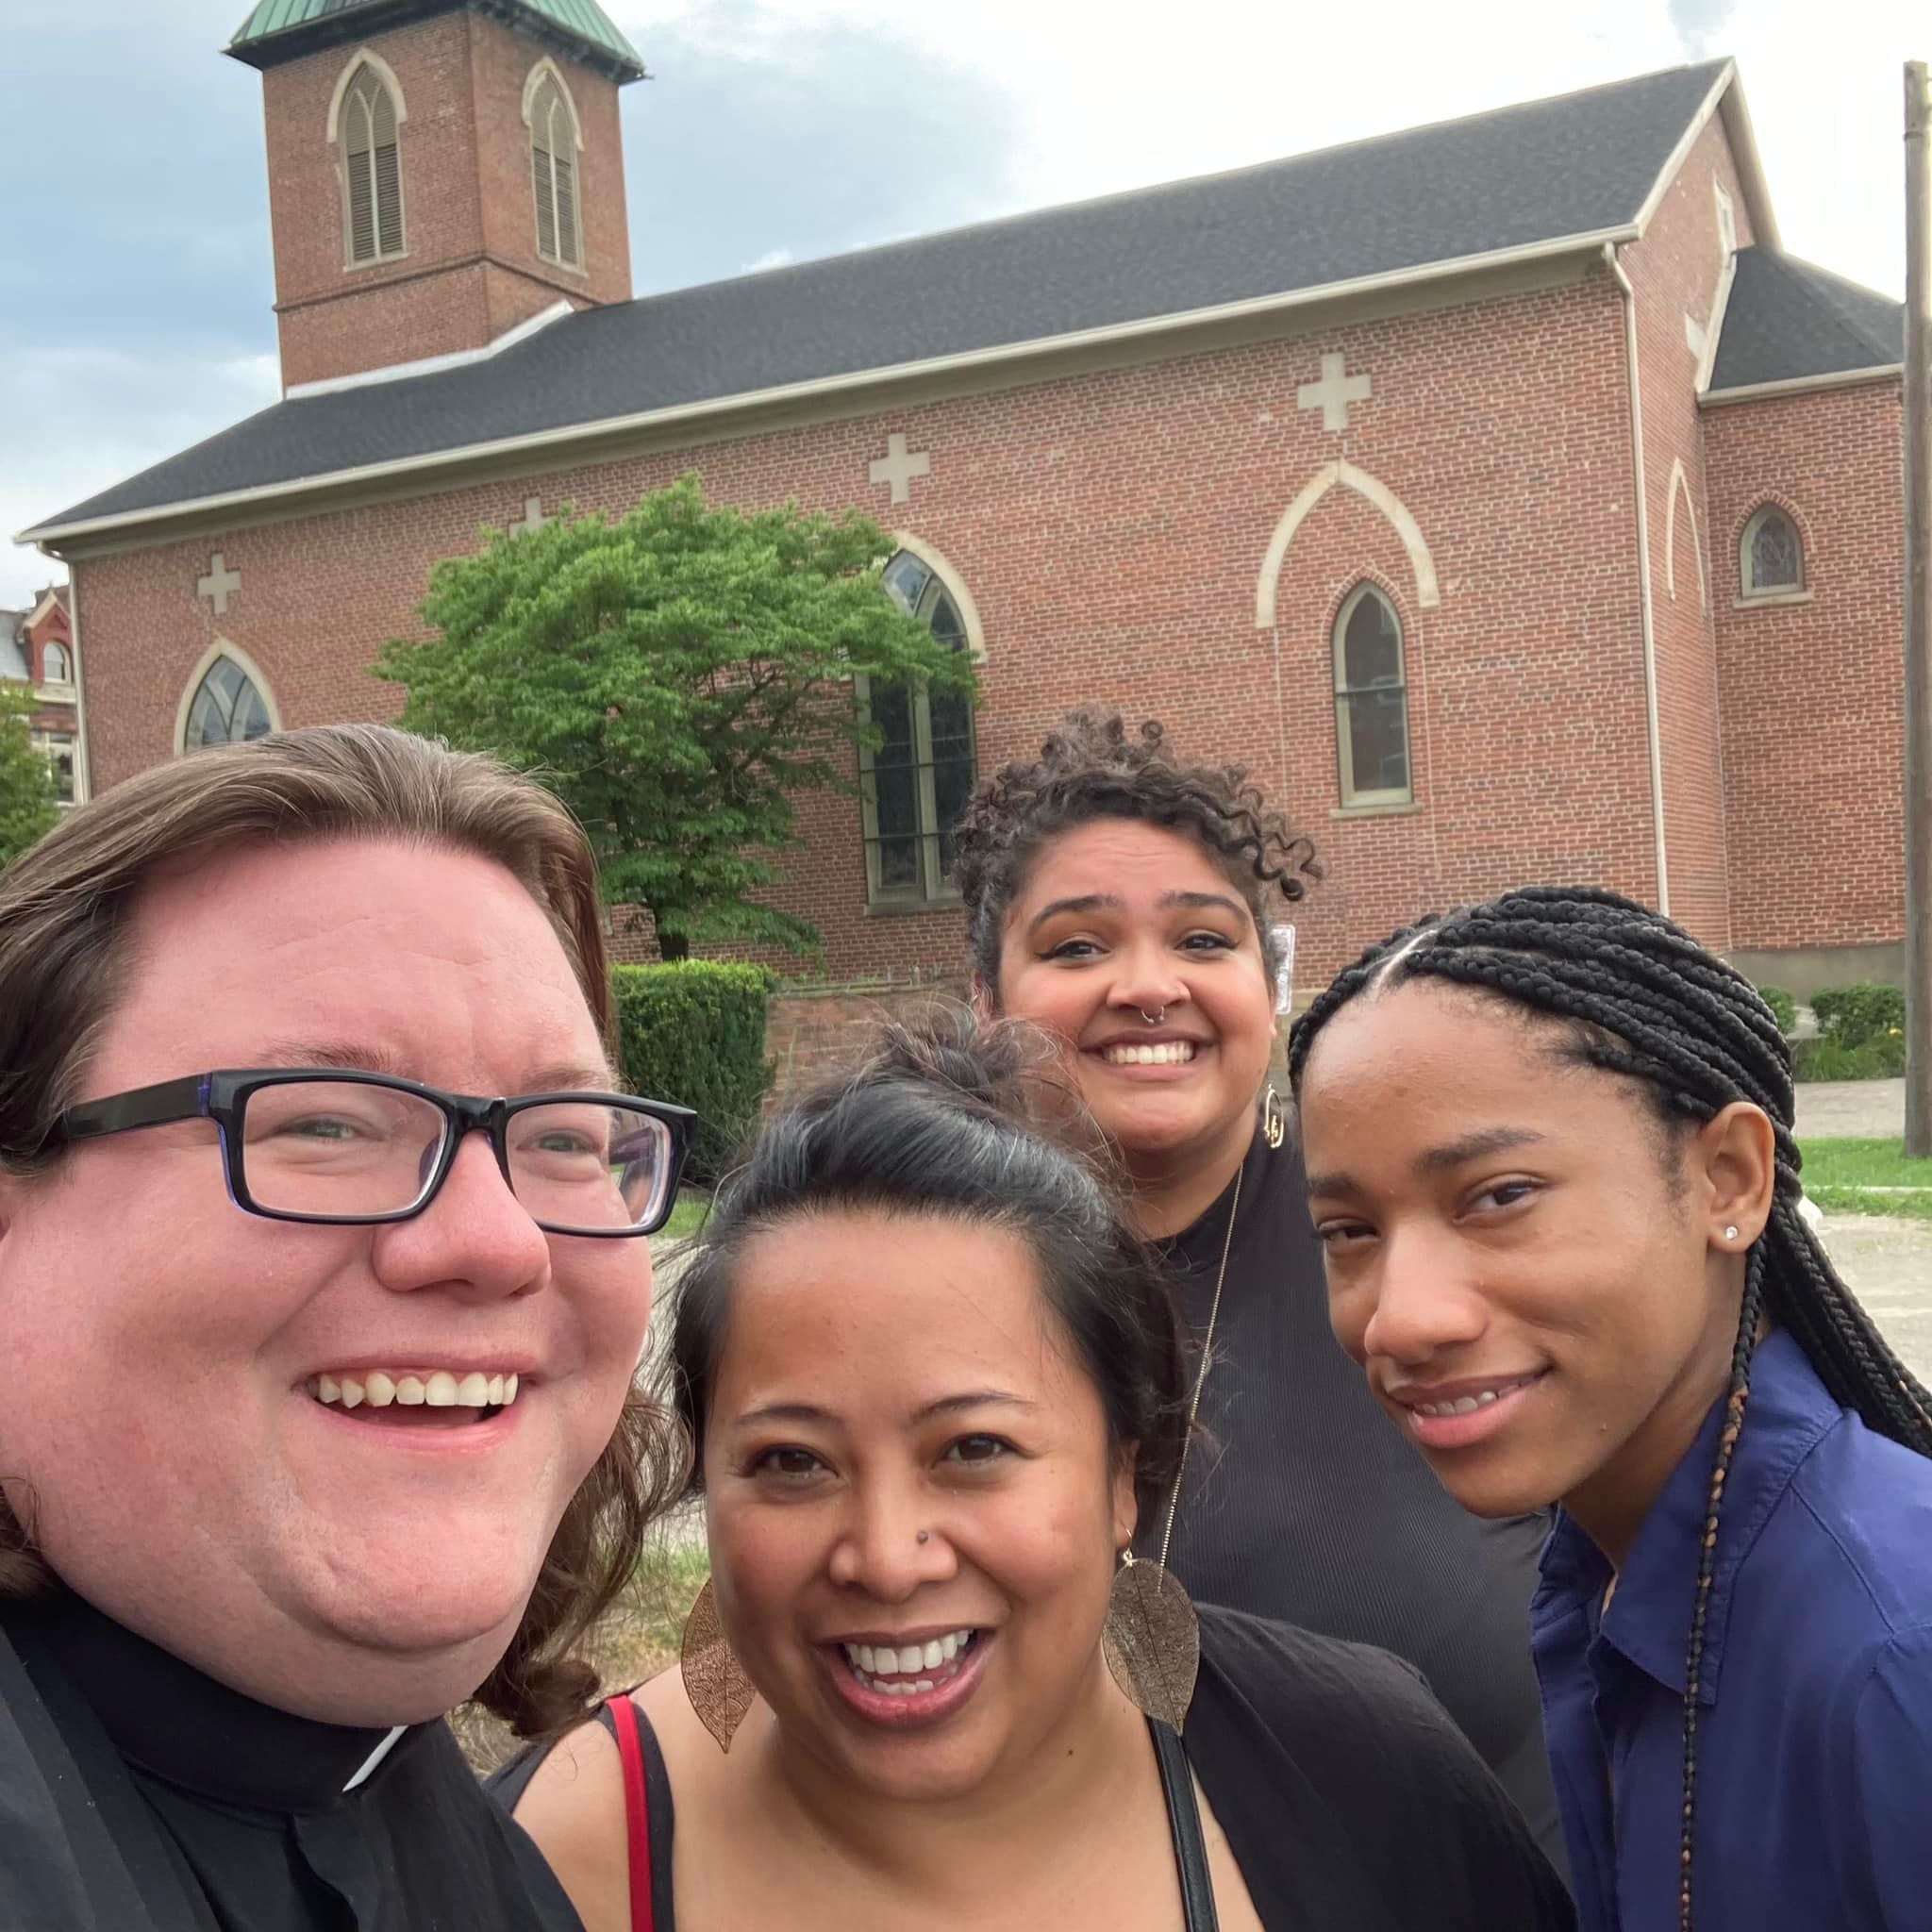 Ramsey with a priest and two other volunteers smiling together in front of their church